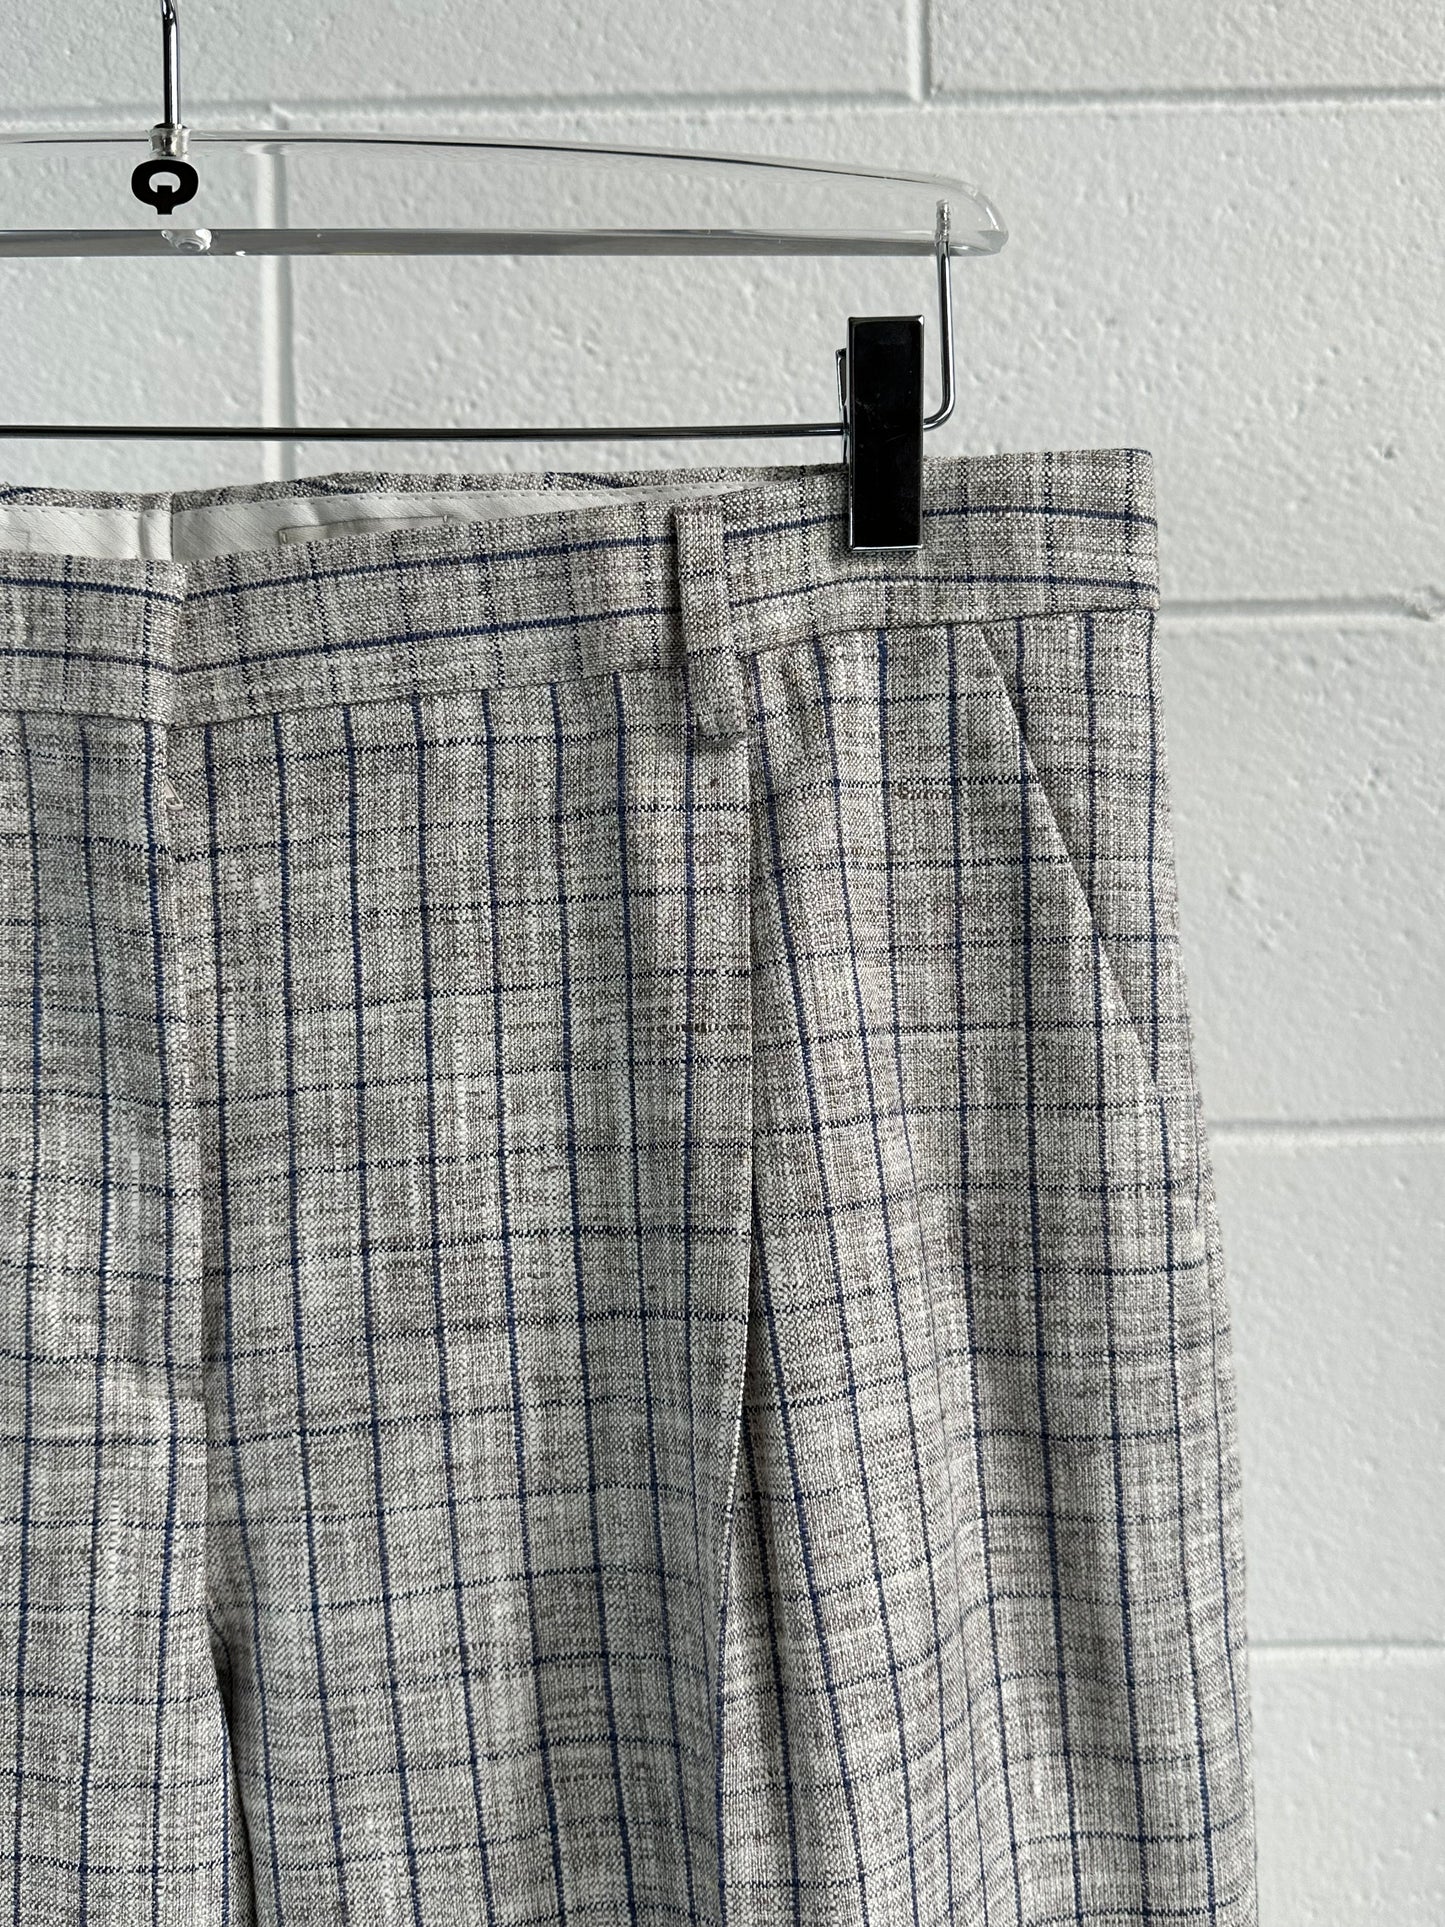 Checked Trousers